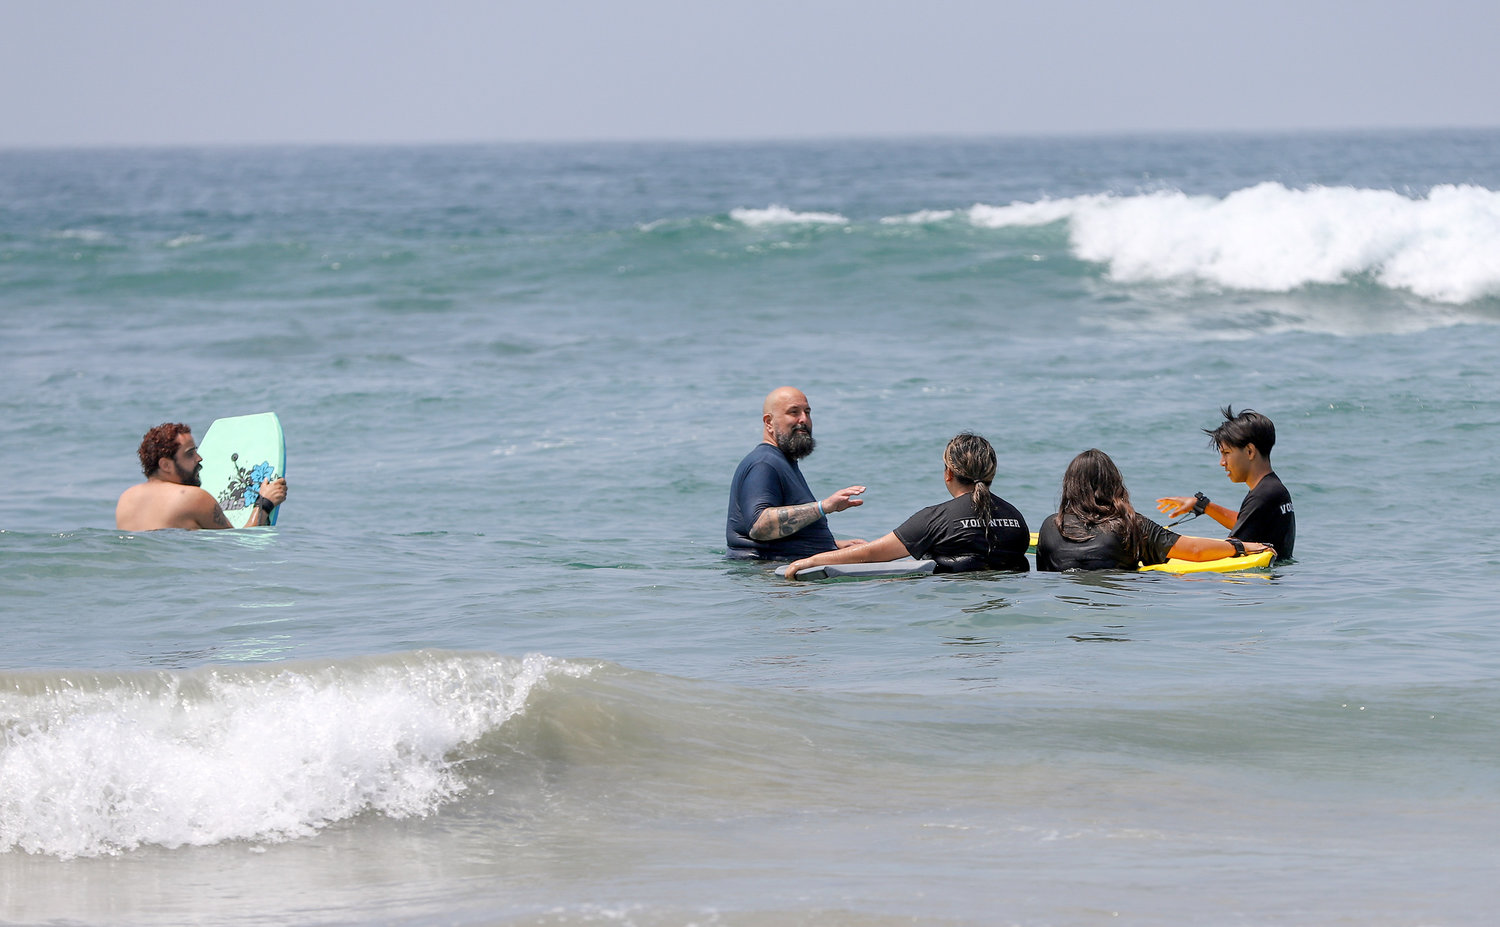 Curtis Lohman, center, pastor of The Garage Church at Huntington Beach, Calif., teaches body boarding to participants of Project Support Anaheim’s Youth, a local youth development program, at Huntington State Beach Park on June 11 as part of Crossover Anaheim. (NAMB/Sonya Singh)